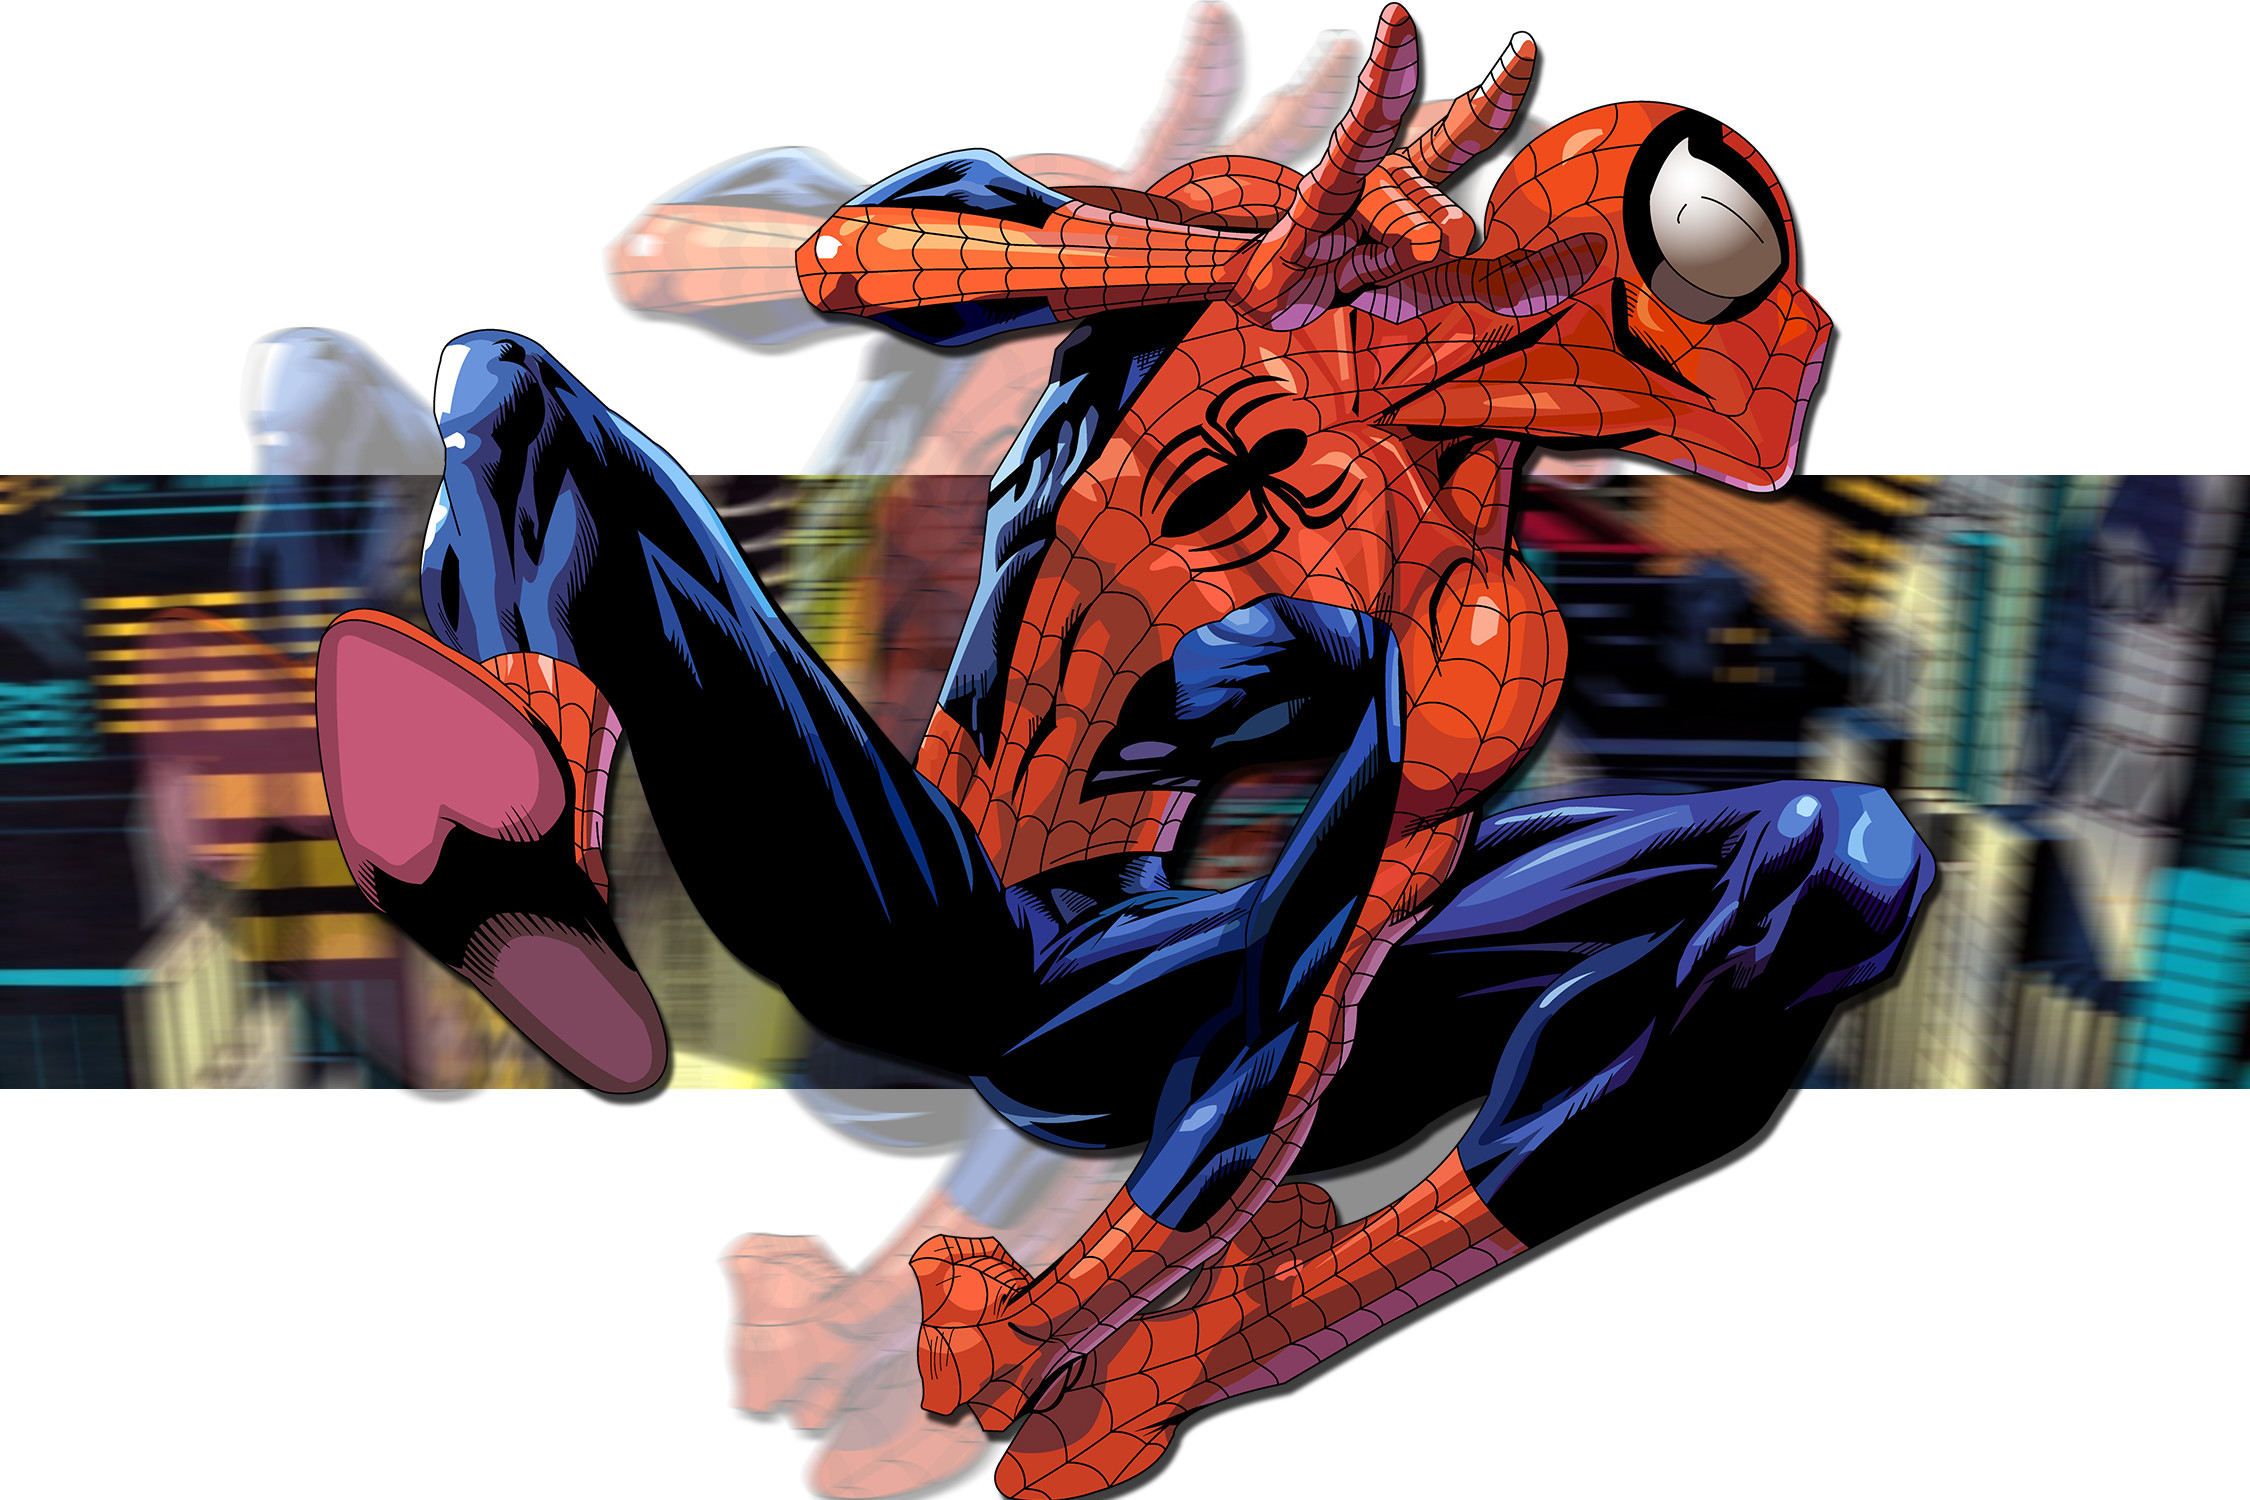 Ultimate spider man iphone wallpaper – photo#11